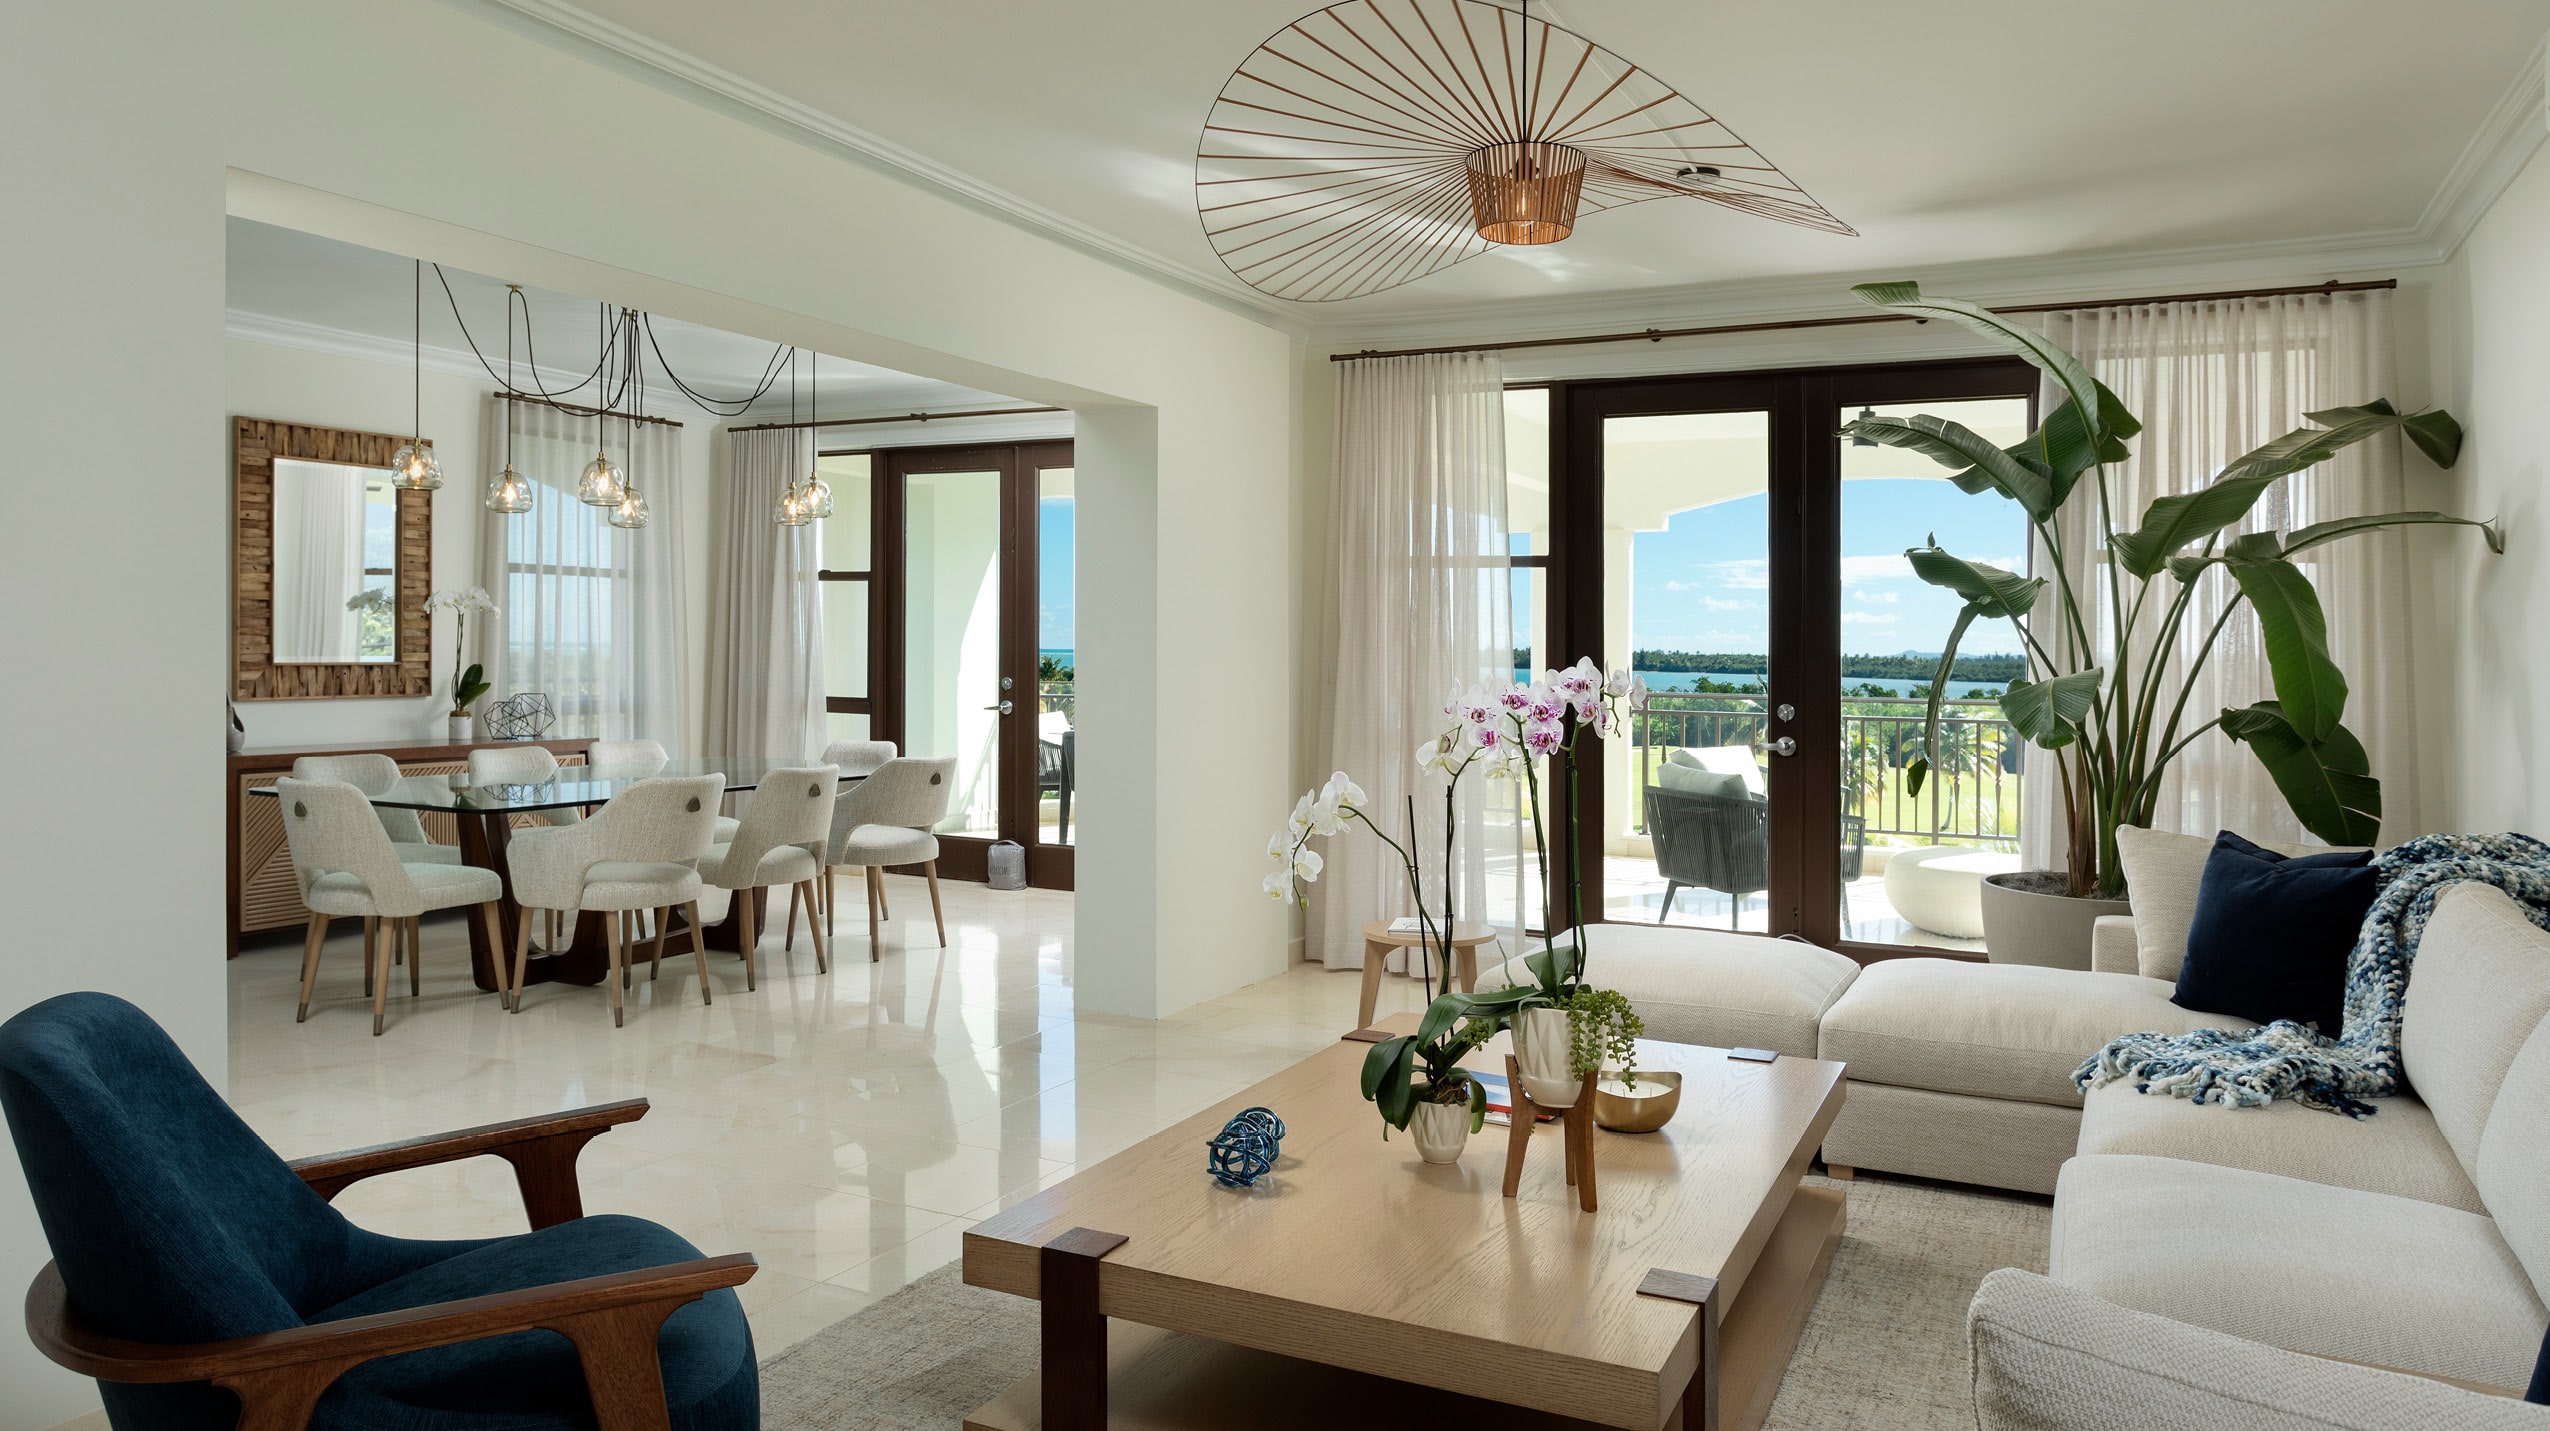 Expansive living and dining area at the Celeste Country Club Residences, featuring modern decor, natural light, and views that bring the outside in.